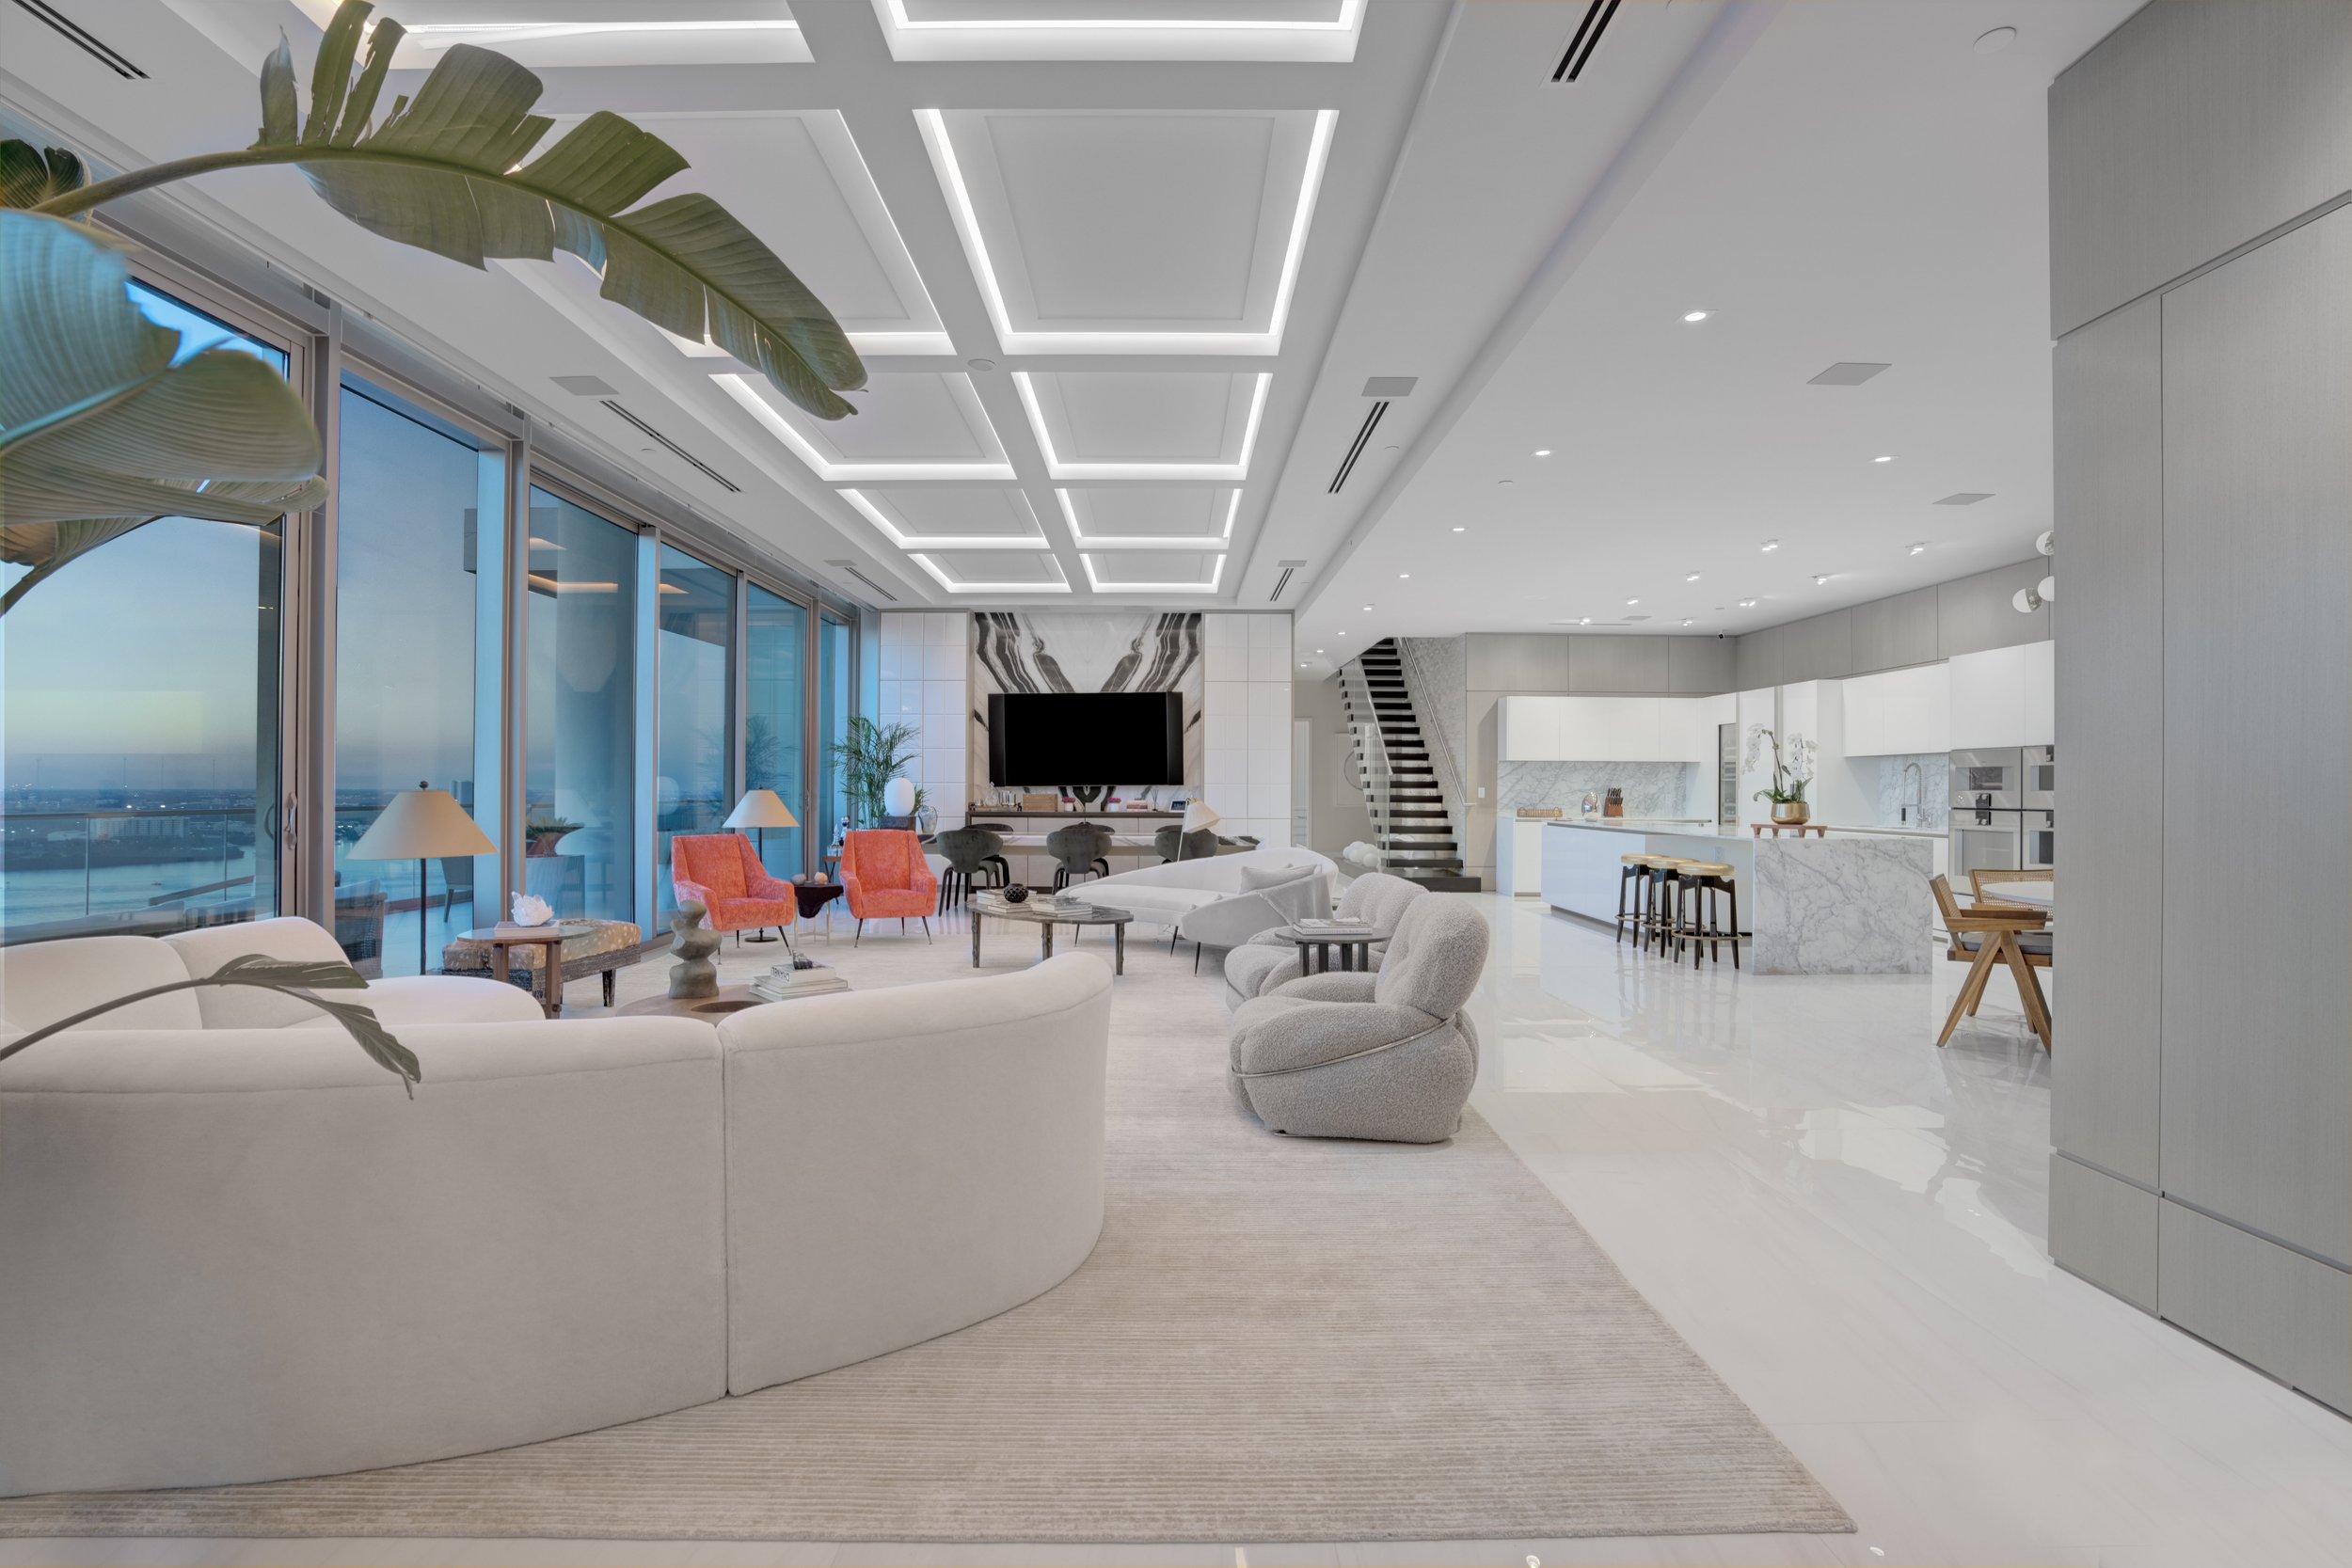 Step Inside This Two-Story Crown Jewel Penthouse At Oceana Bal Harbour Asking $25 Million 25.jpg